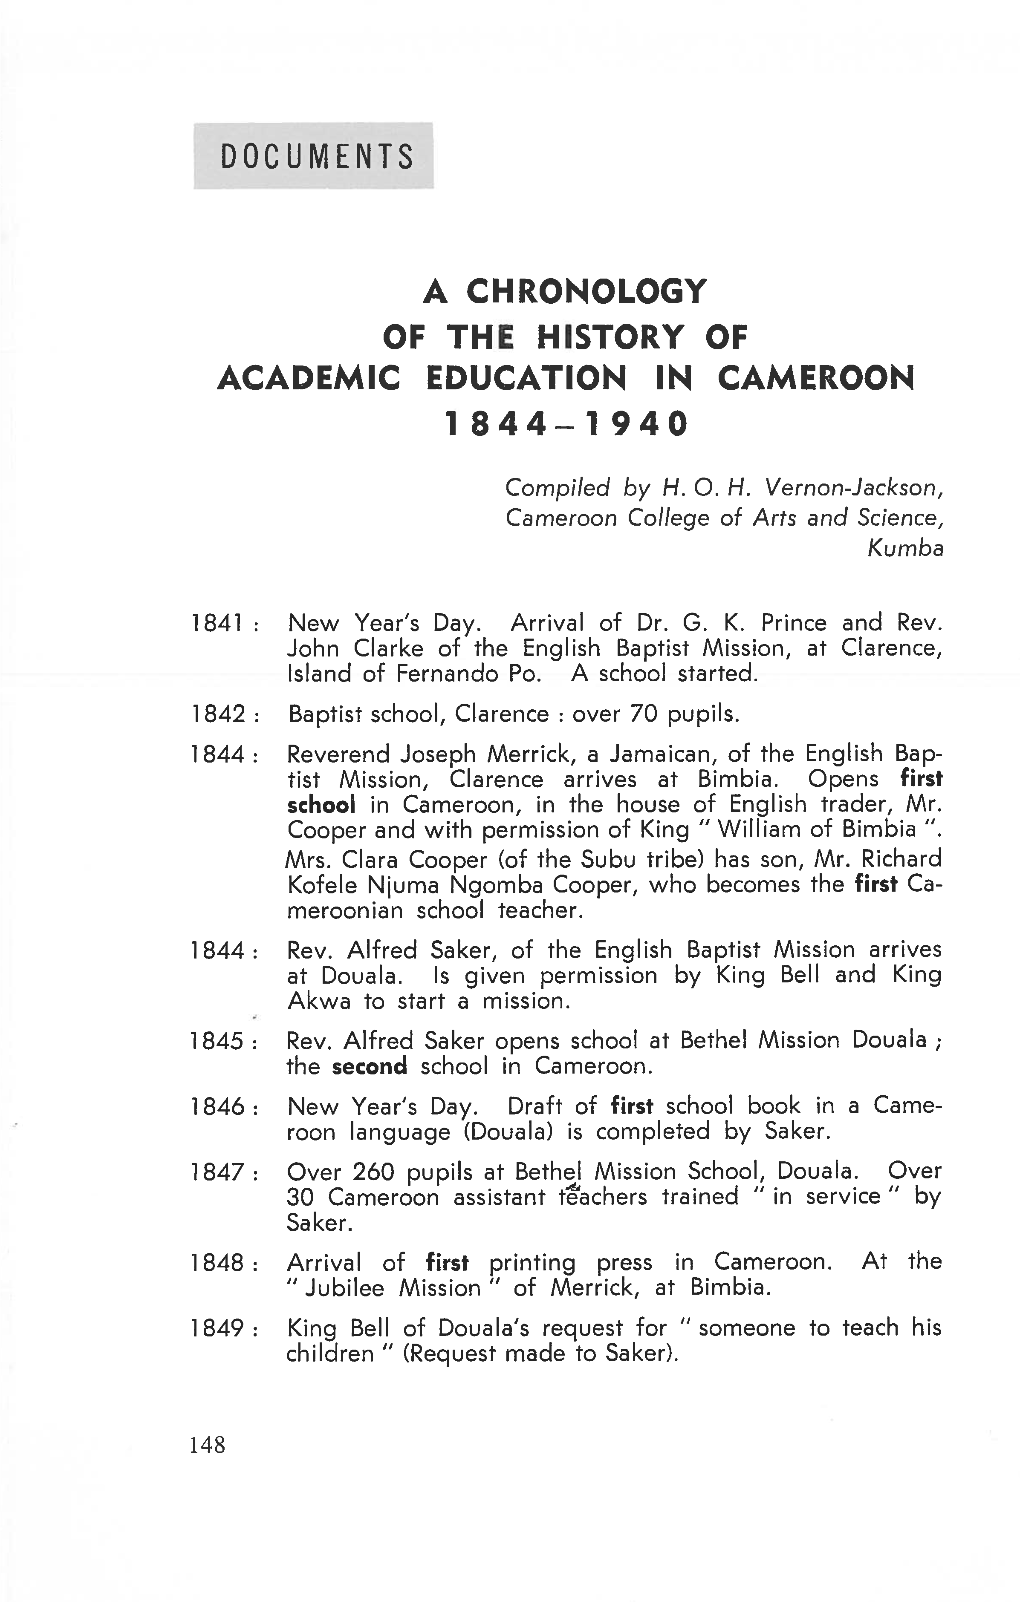 Documents a Chronology of the History of Academic Education in Cameroon 1844-1940